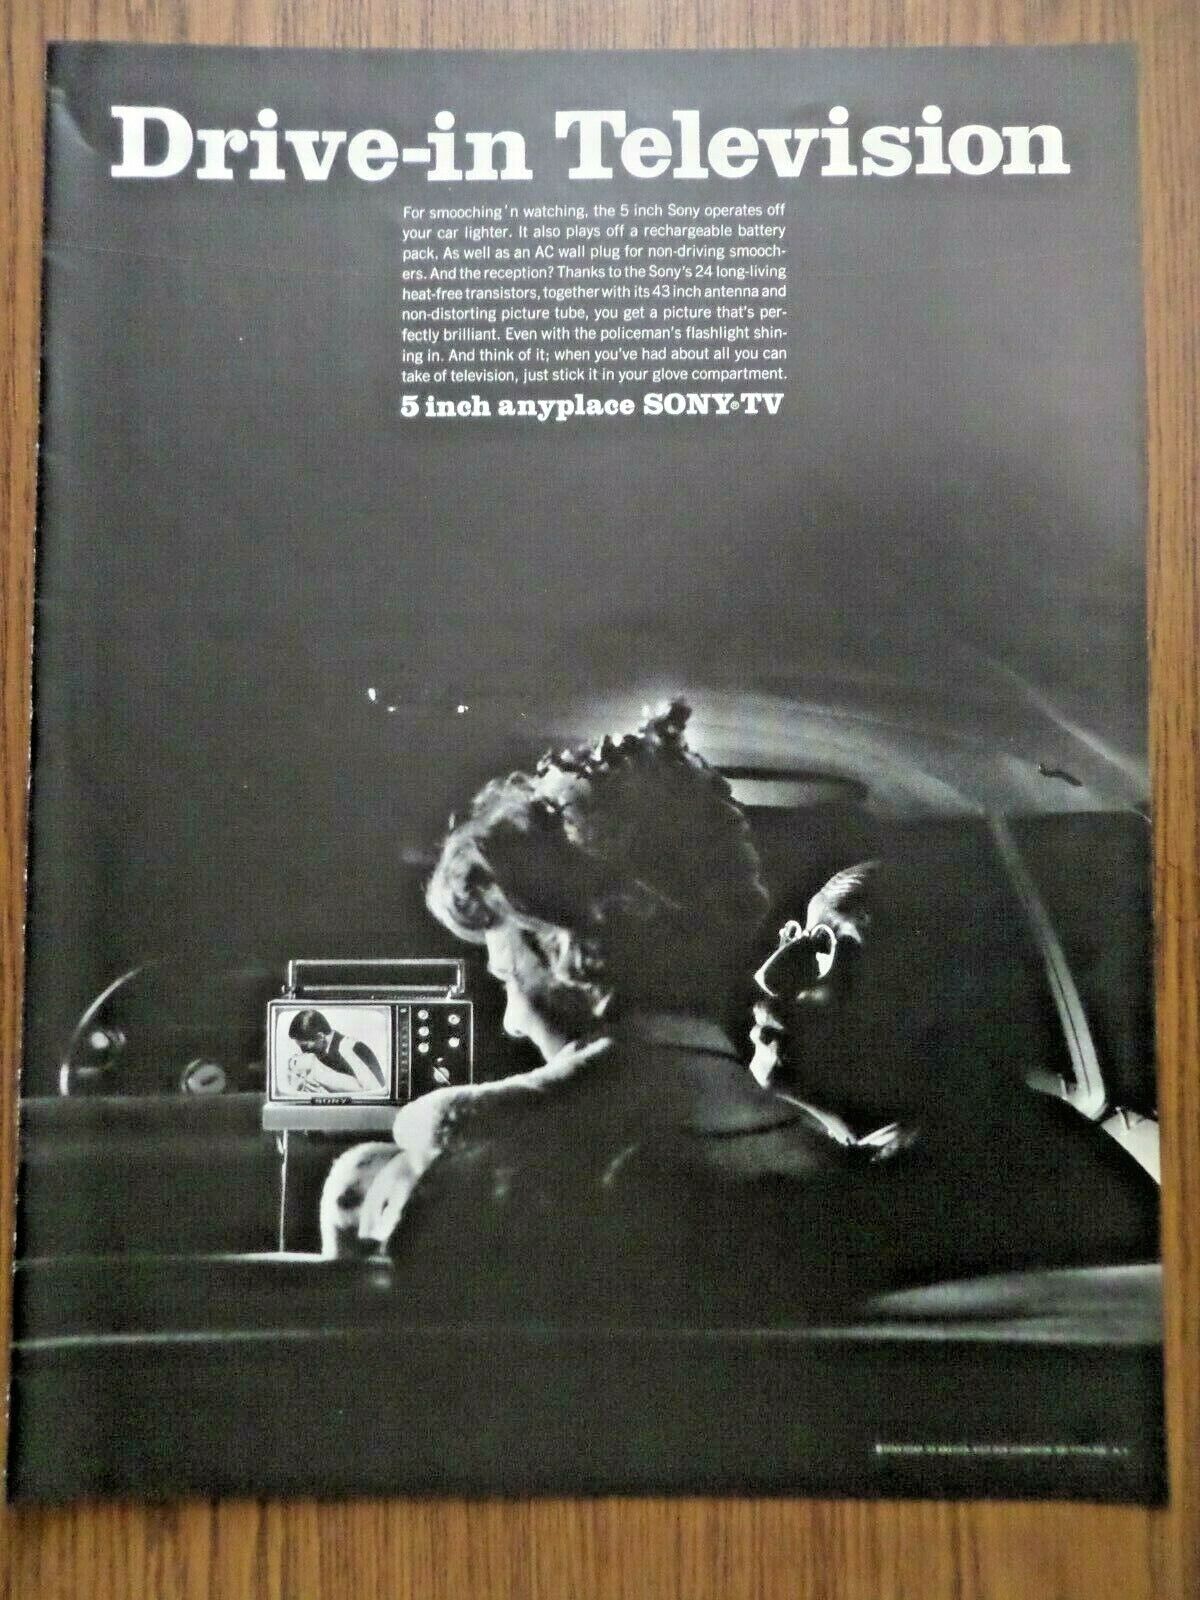 1965 The Sony TV Television Ad  Drive-in Television 5 Inch Anyplace Sony-TV